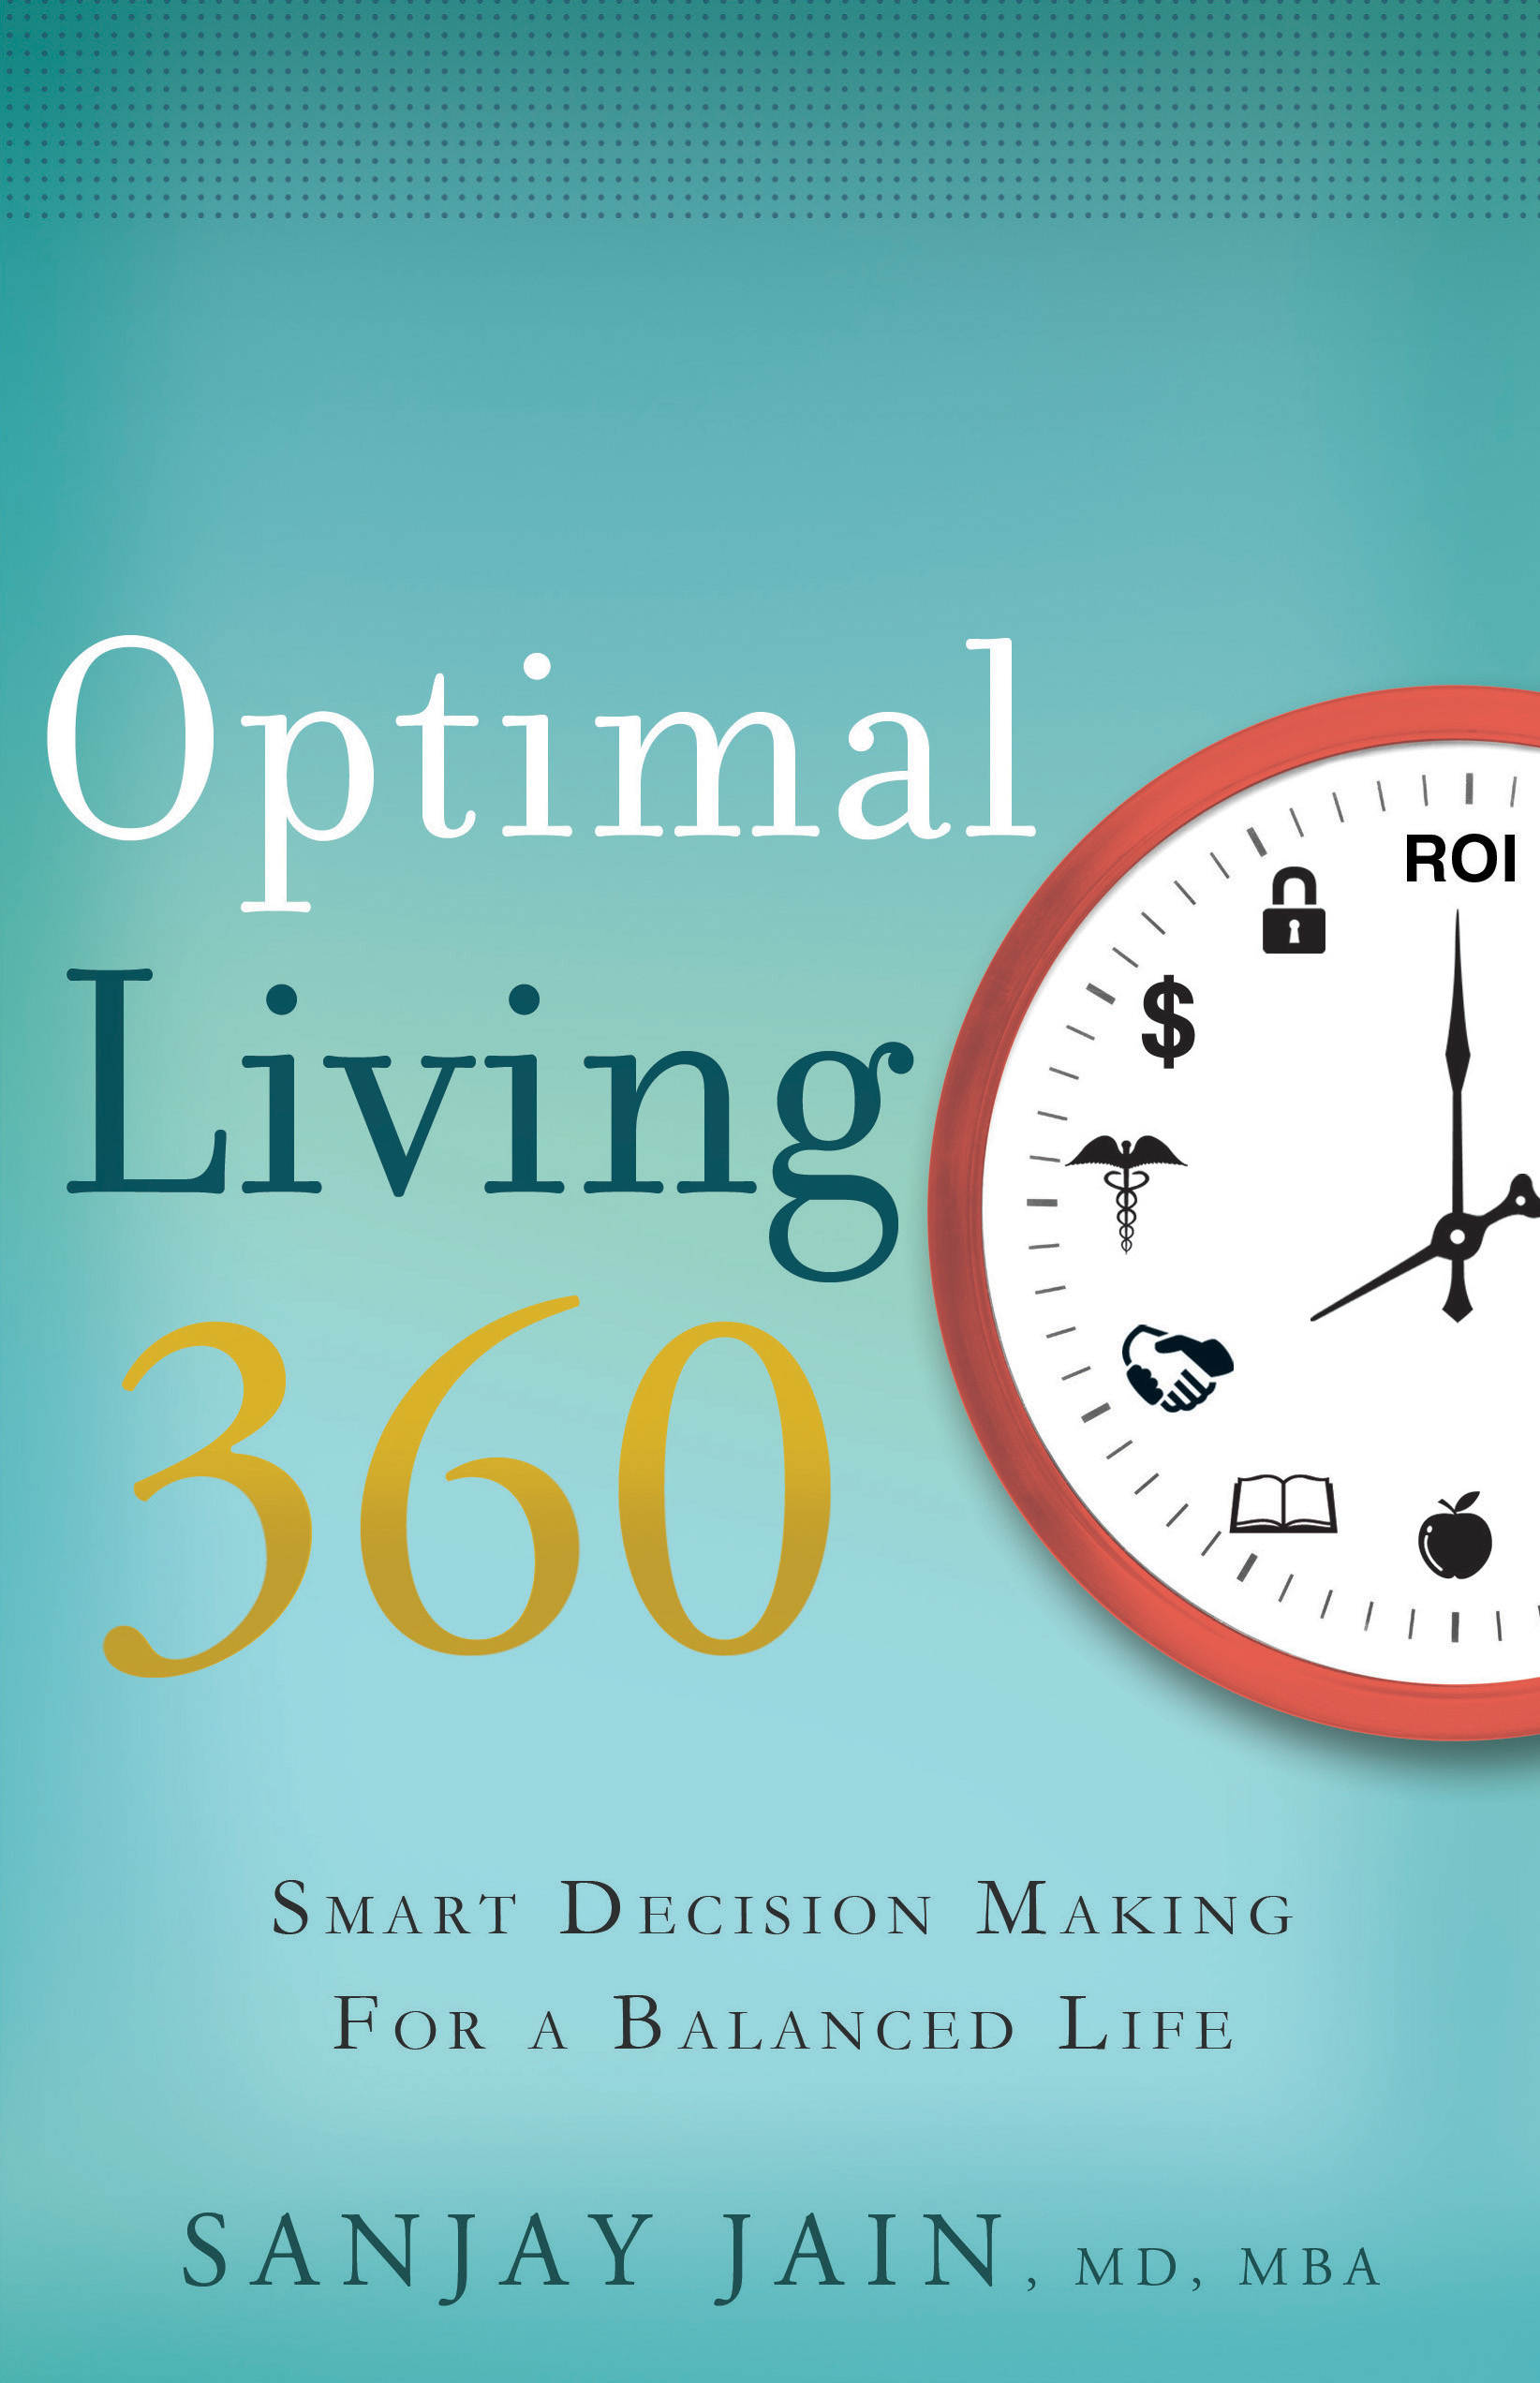 Optimal Living 360: Smart Decision Making for a Balanced Life, available in stores now